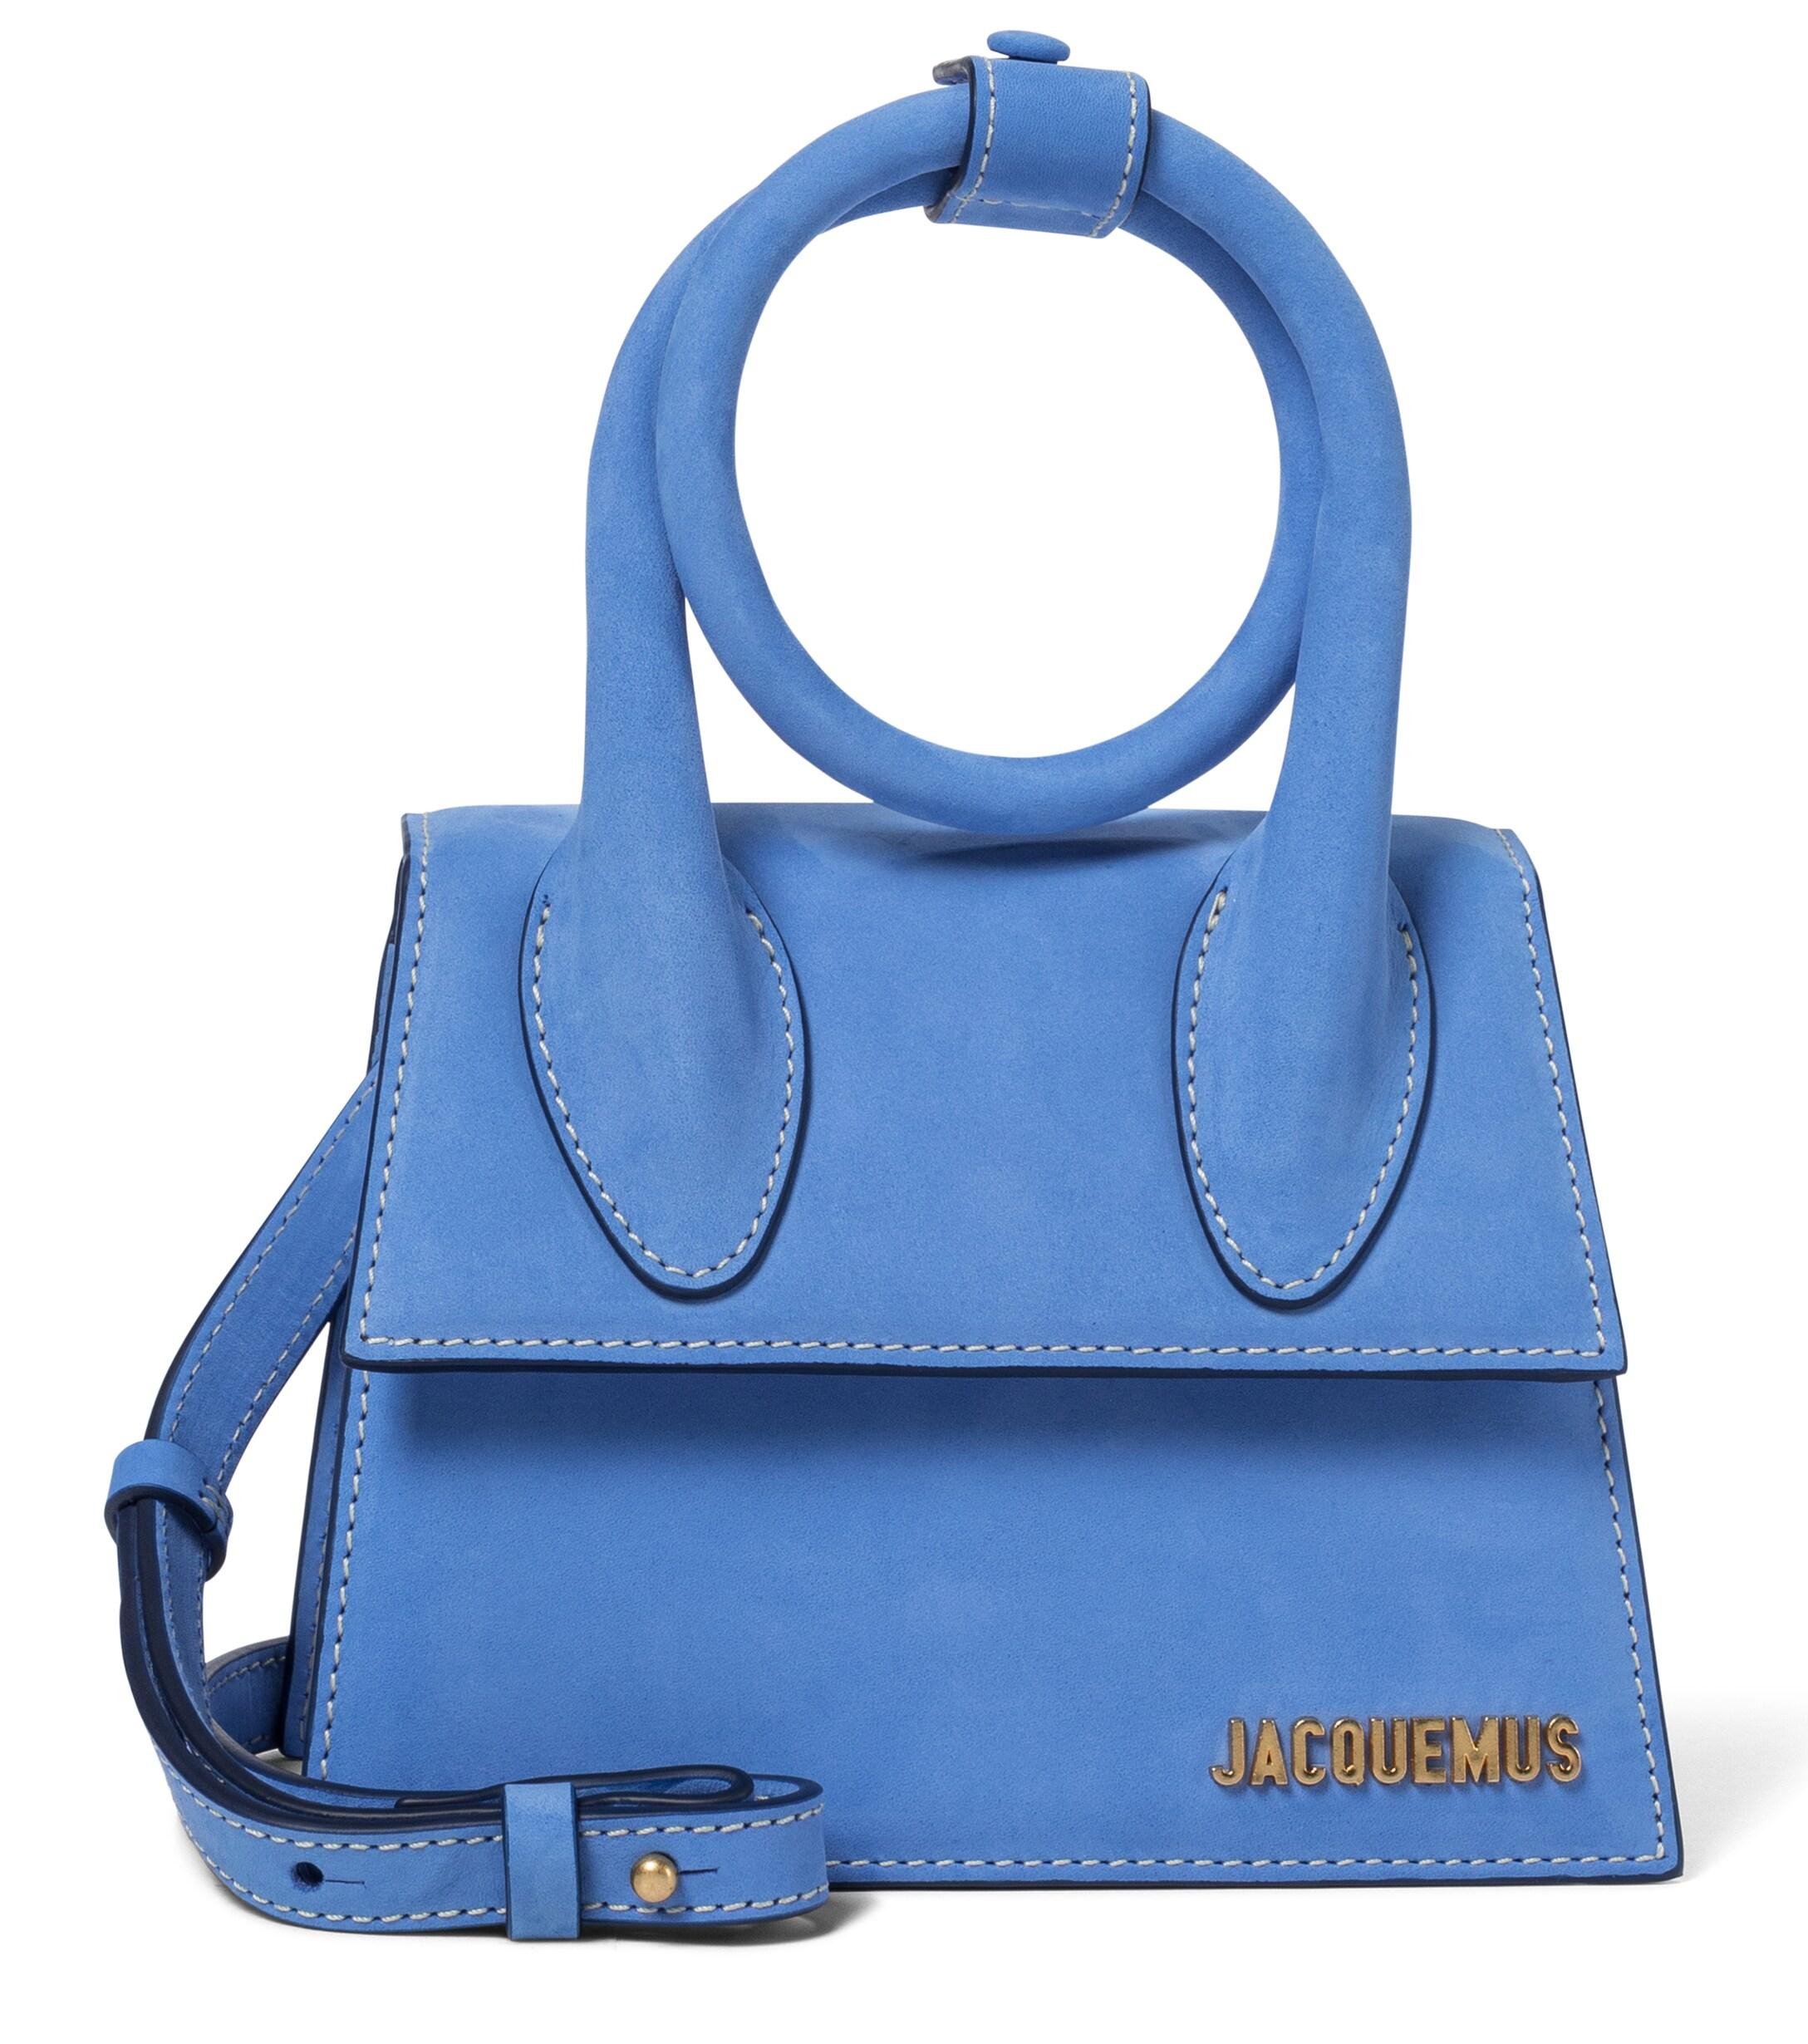 Jacquemus Le Chiquito Noeud Nubuck Tote in Blue | Lyst